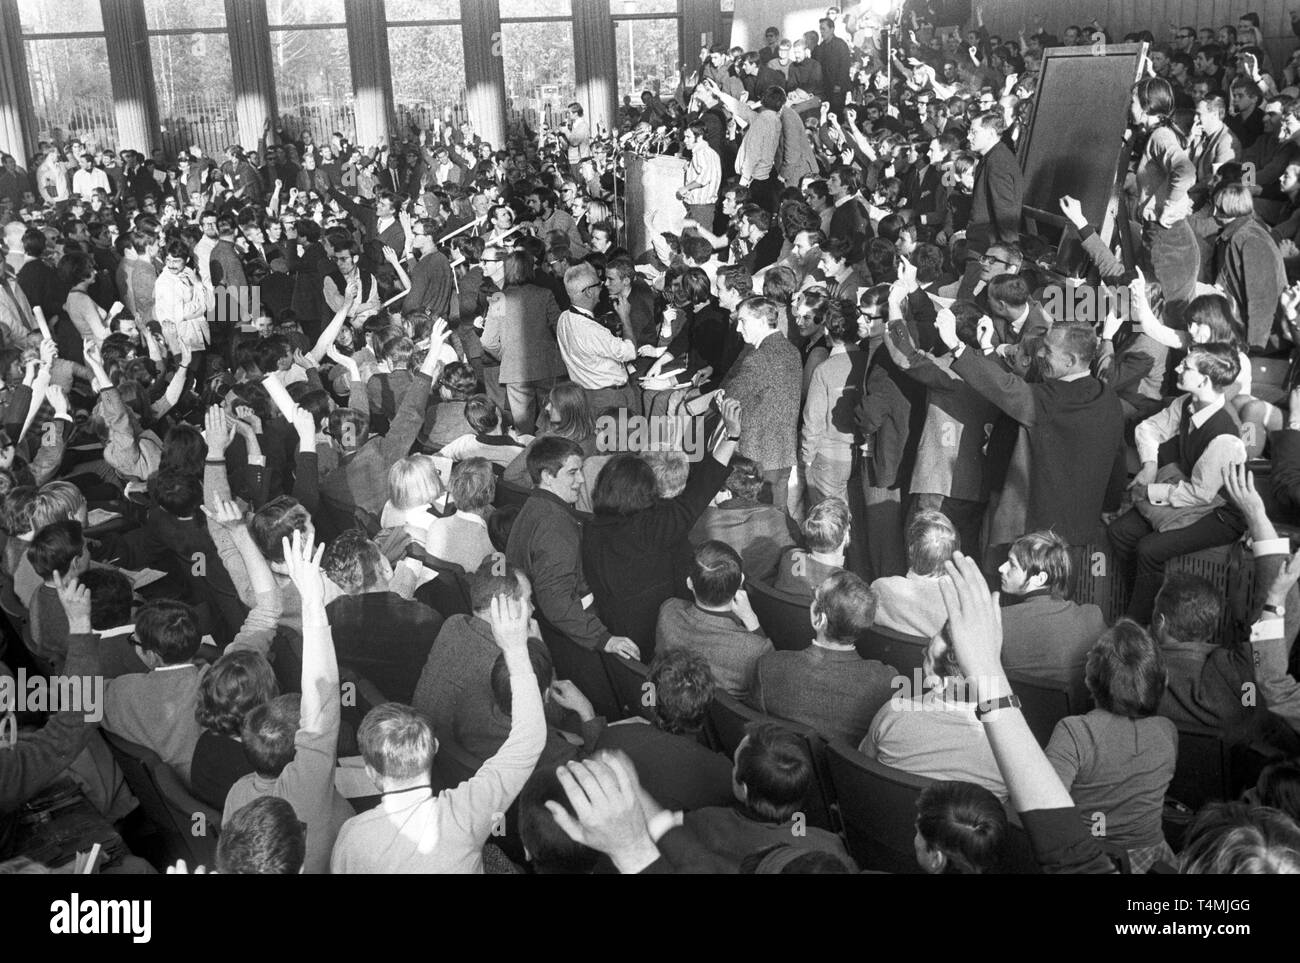 About 2,000 students have gathered in the overcrowded Auditorium Maximum for the inaugural meeting of the Kritische Universität (KU), translates as Critical University (initiated by the AStA of Free University Berlin), on 01 November 1967, to decide on aims and forms of organisation of the Critical University. | usage worldwide Stock Photo